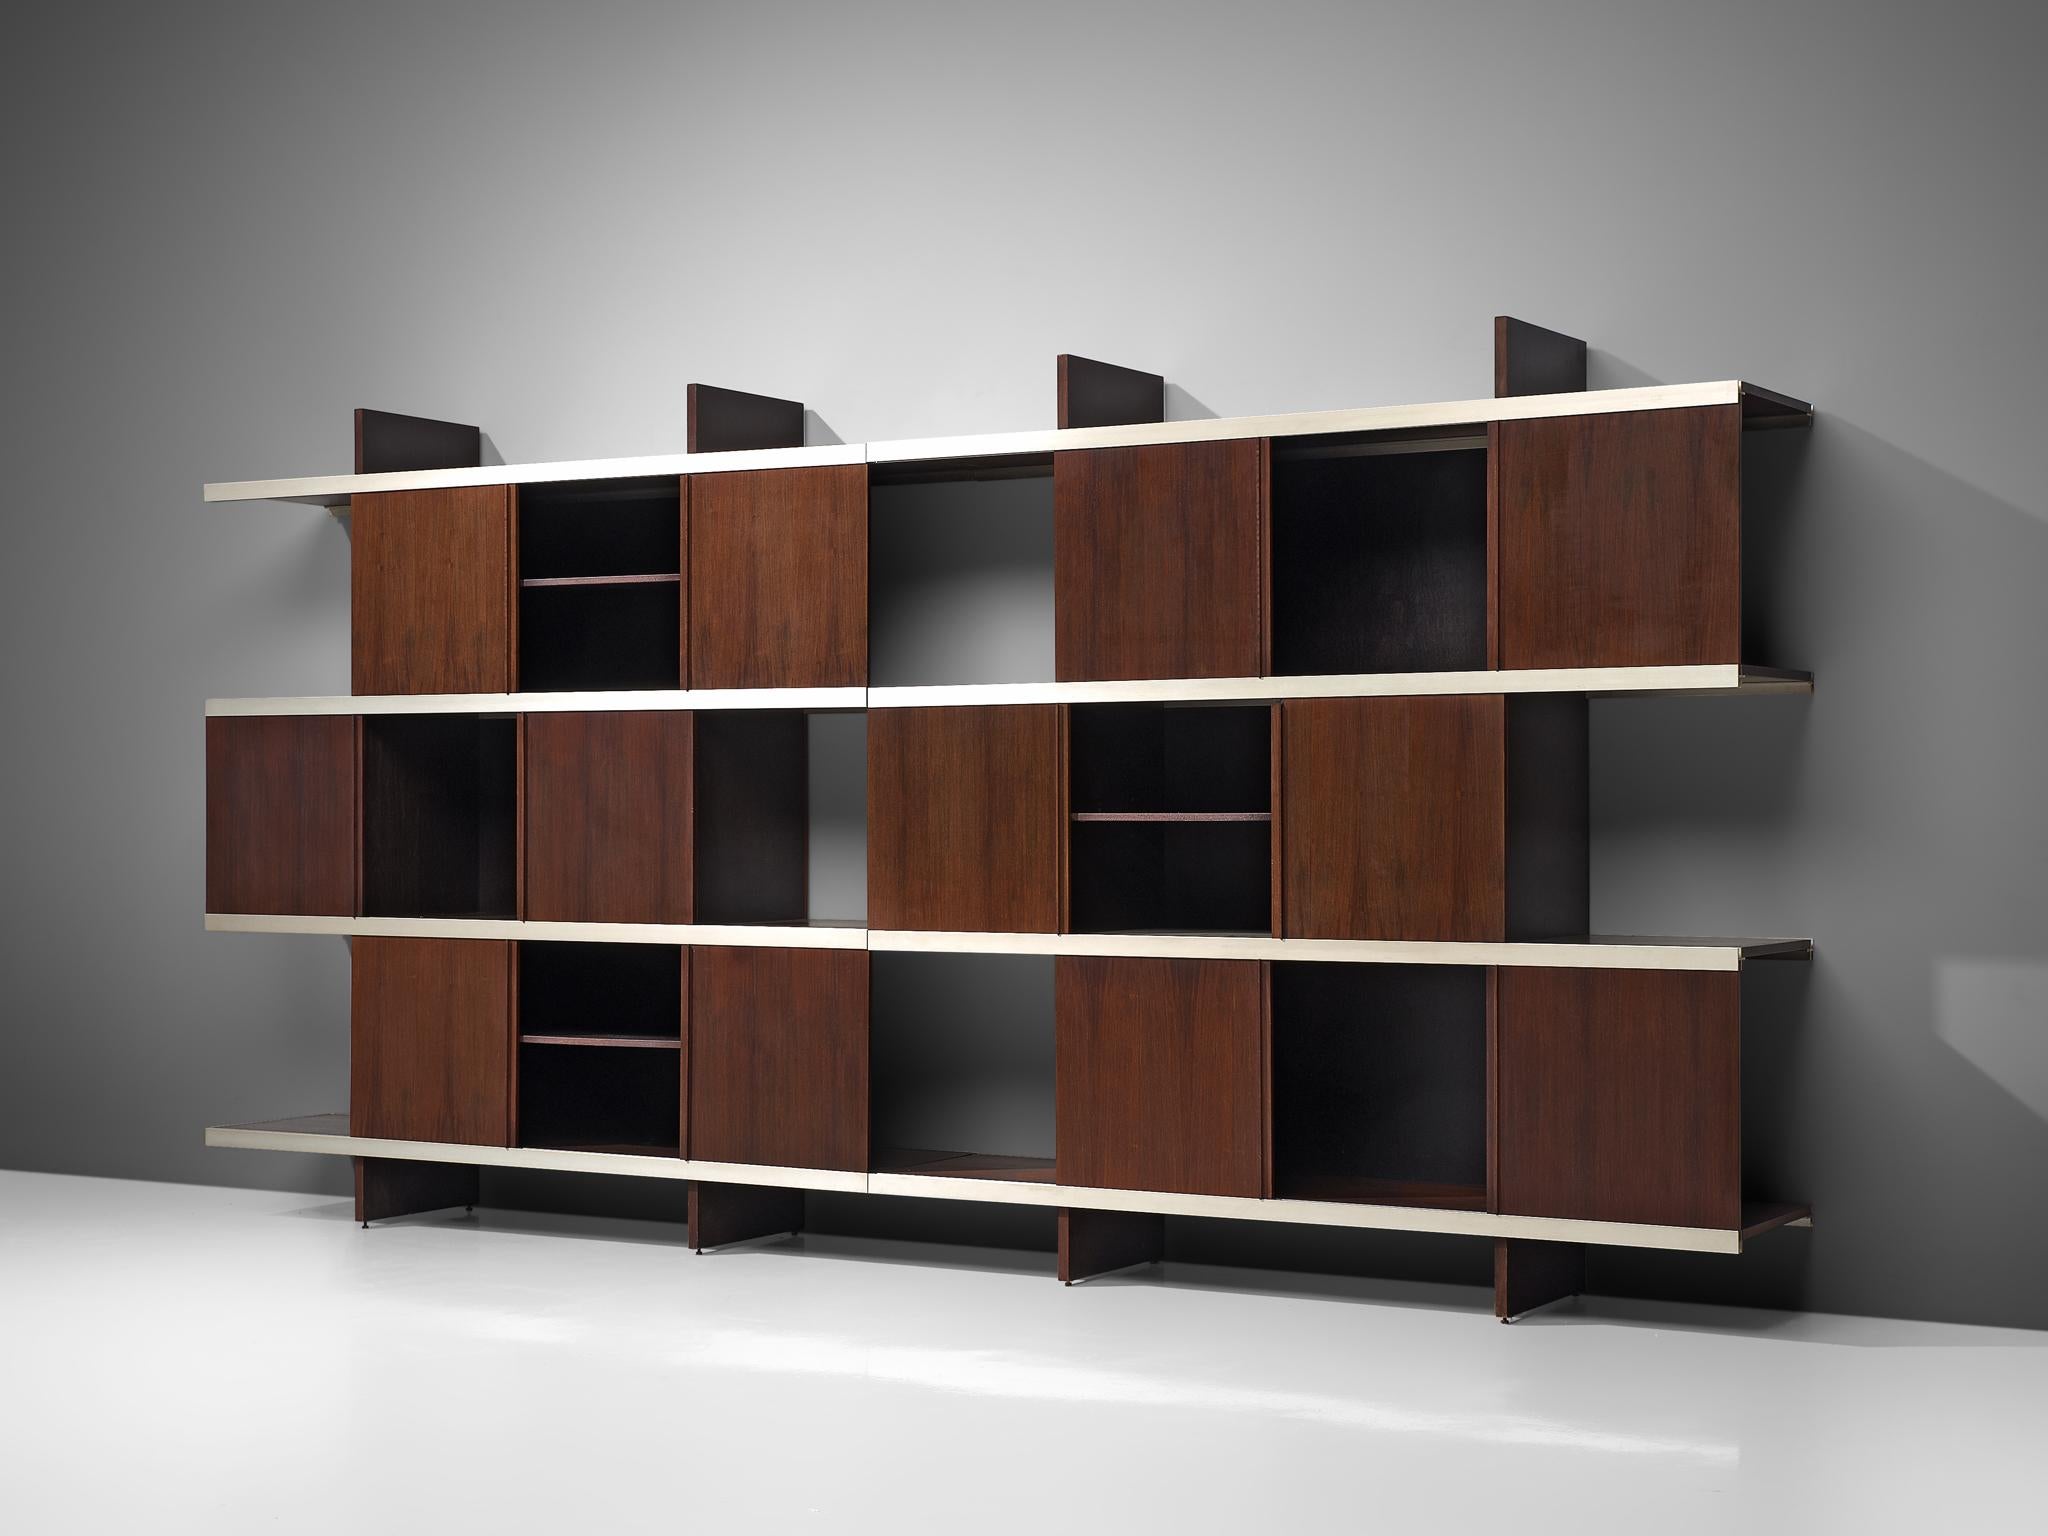 Angelo Mangiarotti for Poltronova, cabinet or bookcase from the multiuse series, exotic wood, aluminum, Italy, 1960s.

Beautiful bookcase or sideboard of the multiuse series that Mangiarotti designed for Poltronova. Multiuse series stands for